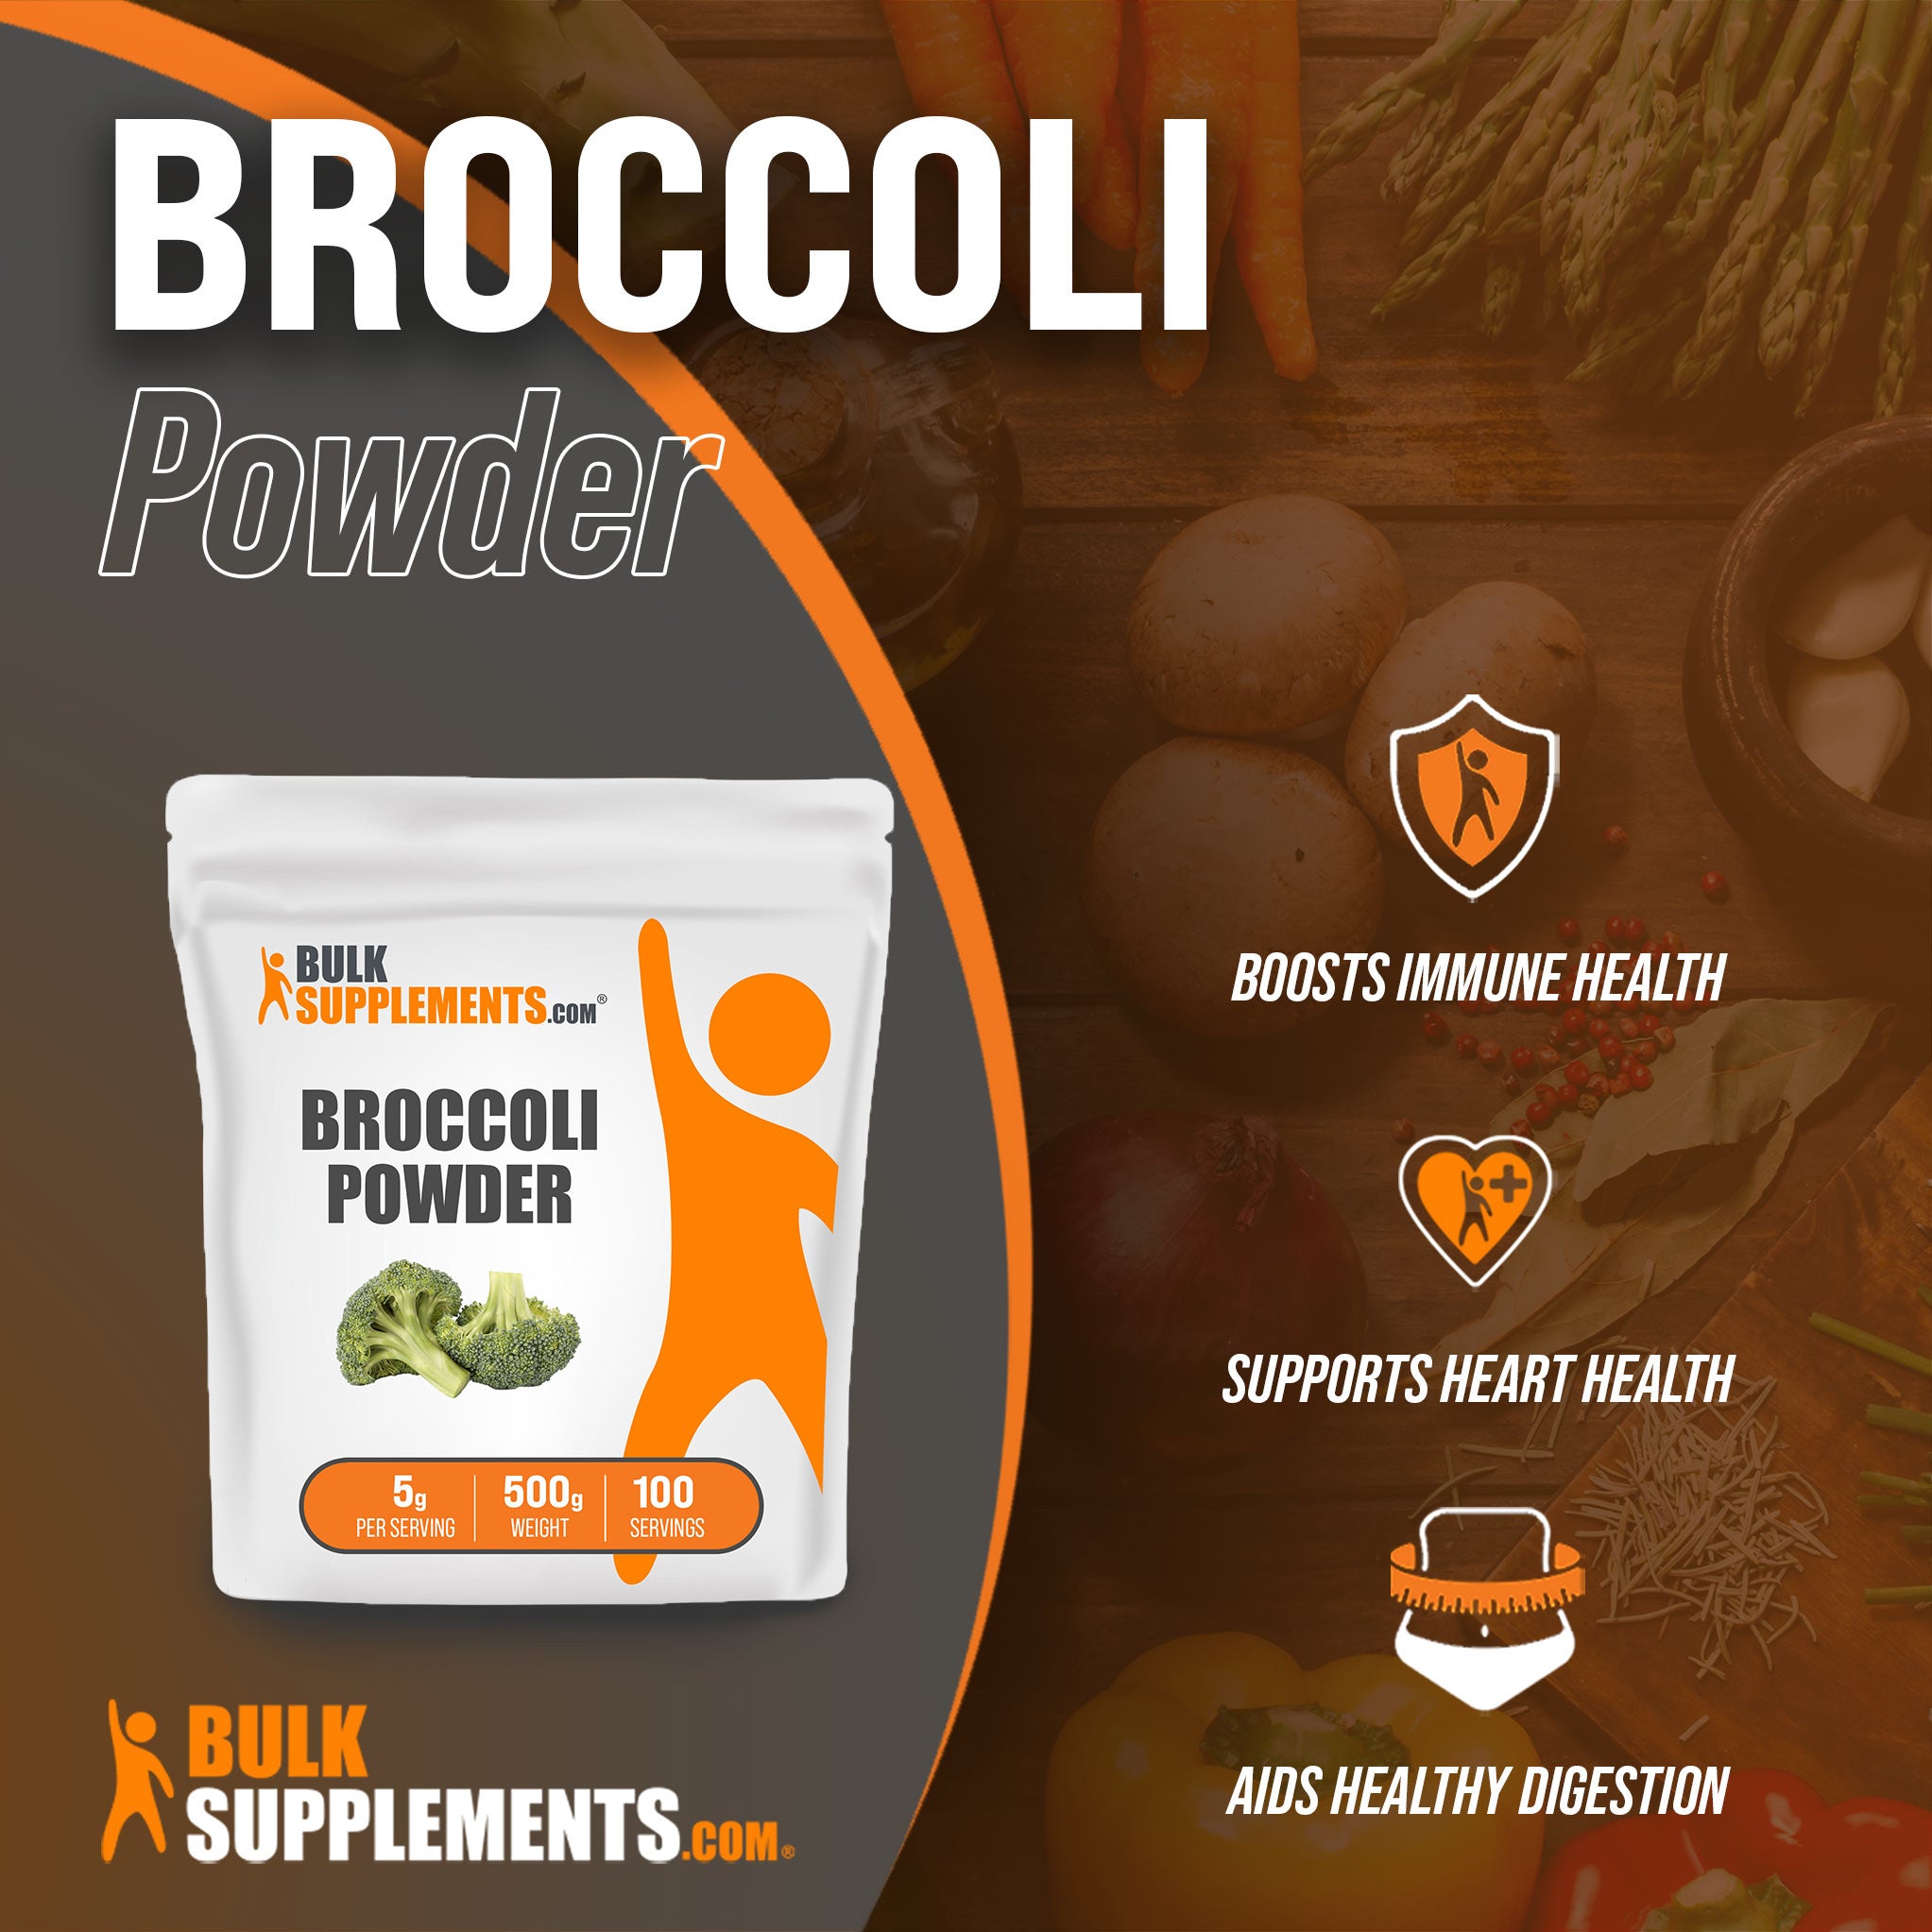 Benefits of Broccoli Powder; boosts immune health, supports health health, aids healthy digestion